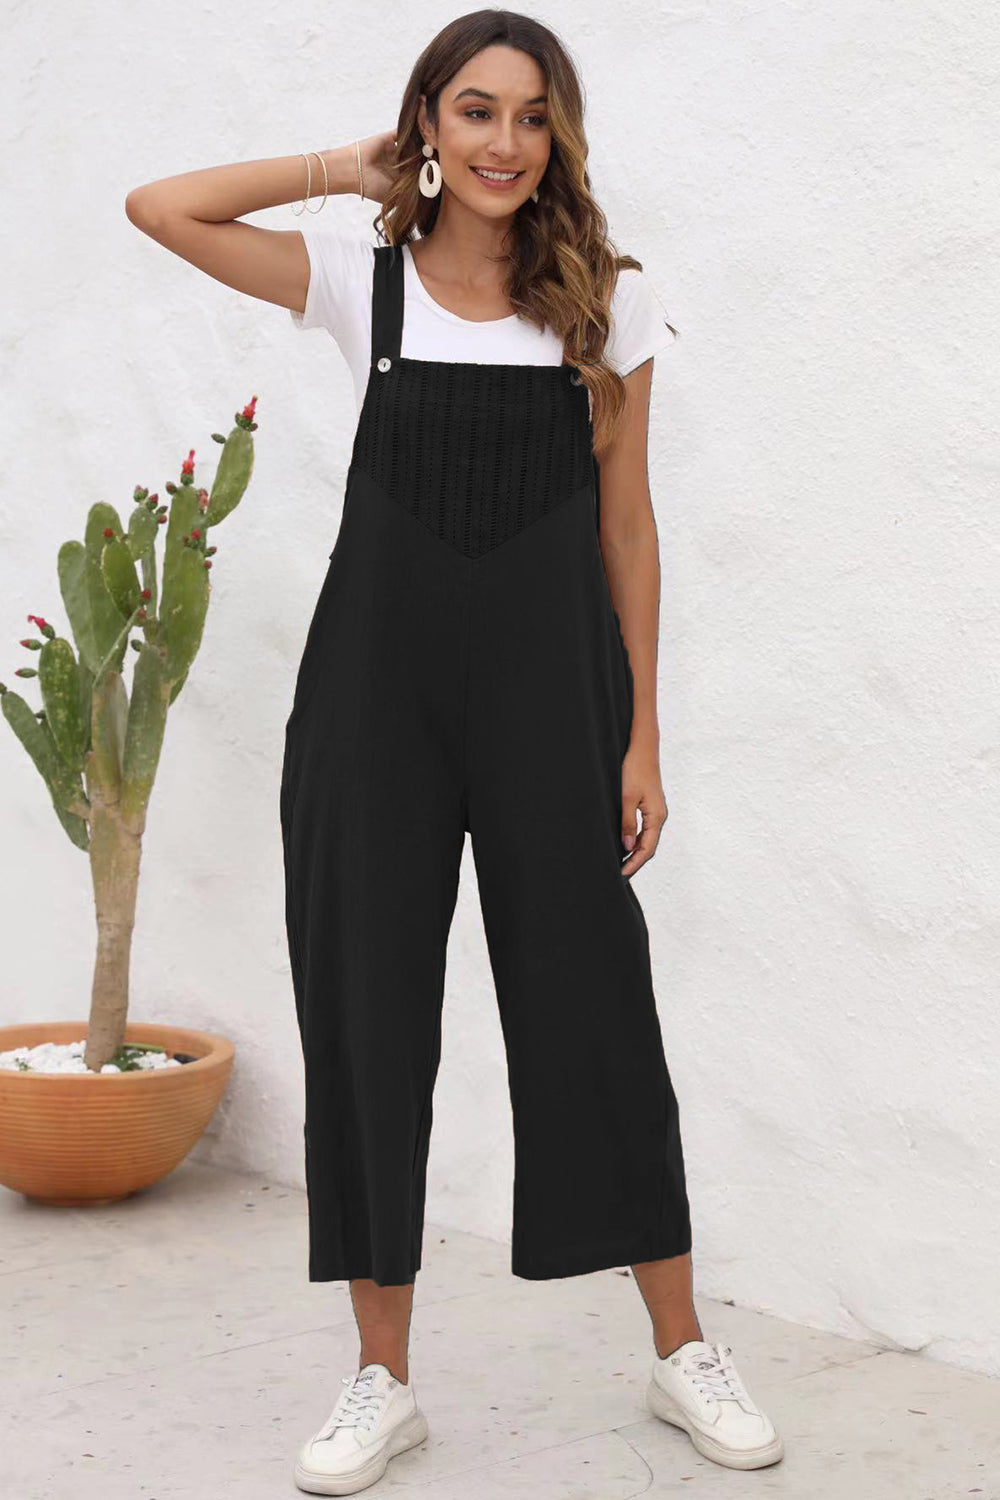 PREORDER- Full Size Square Neck Wide Strap Jumpsuit